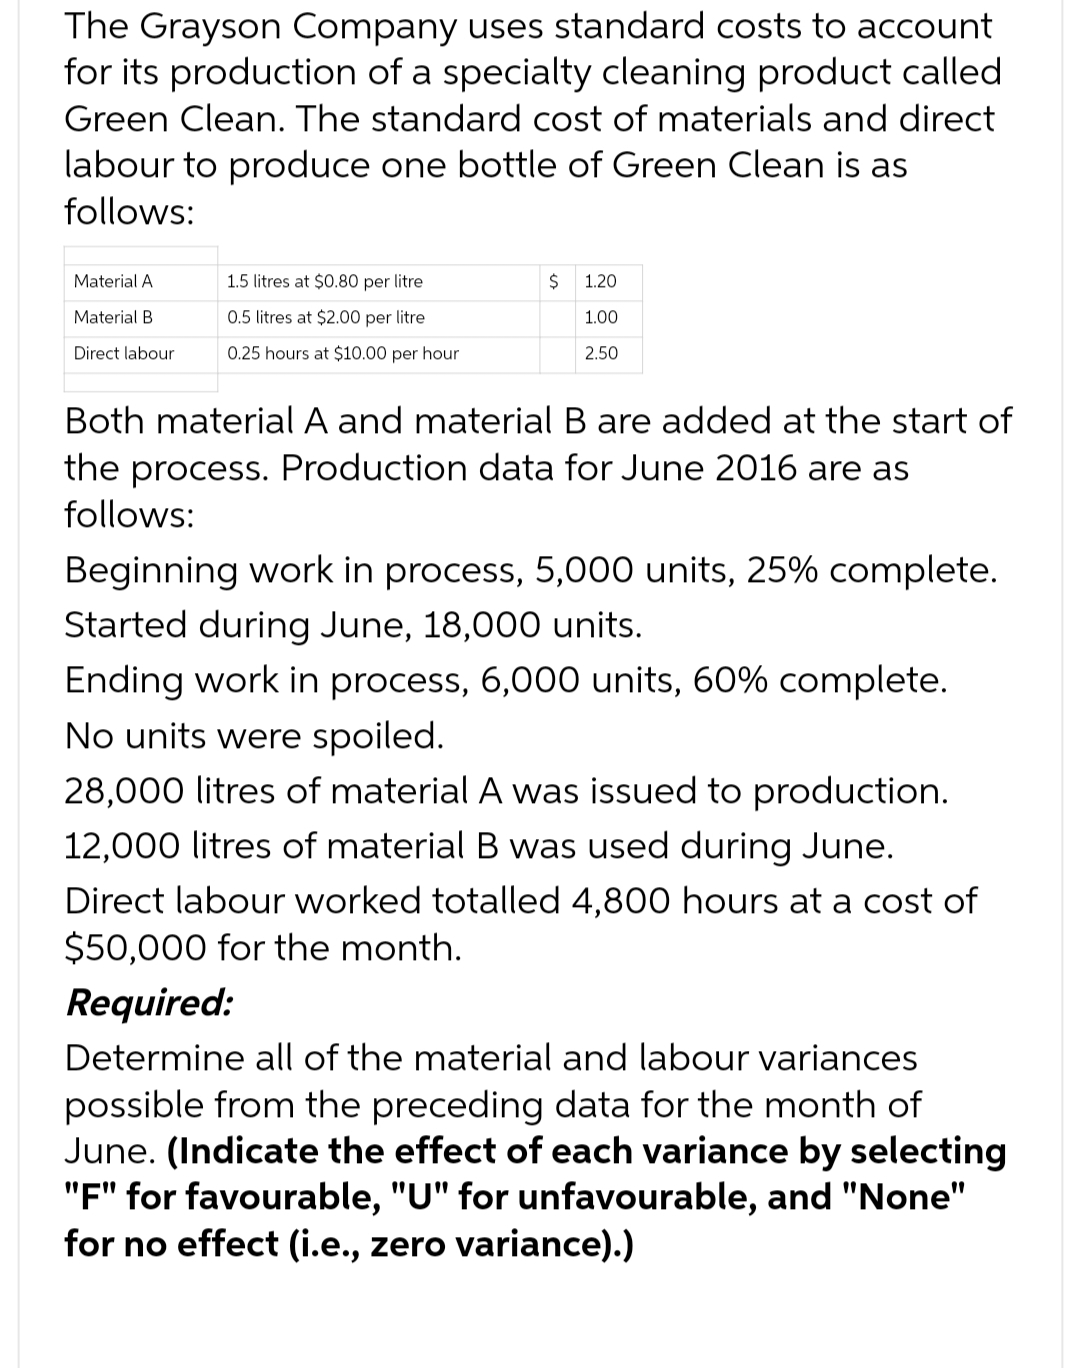 The Grayson Company uses standard costs to account
for its production of a specialty cleaning product called
Green Clean. The standard cost of materials and direct
labour to produce one bottle of Green Clean is as
follows:
Material A
Material B.
Direct labour
1.5 litres at $0.80 per litre
0.5 litres at $2.00 per litre
0.25 hours at $10.00 per hour
$
1.20
1.00
2.50
Both material A and material B are added at the start of
the process. Production data for June 2016 are as
follows:
Beginning work in process, 5,000 units, 25% complete.
Started during June, 18,000 units.
Ending work in process, 6,000 units, 60% complete.
No units were spoiled.
28,000 litres of material A was issued to production.
12,000 litres of material B was used during June.
Direct labour worked totalled 4,800 hours at a cost of
$50,000 for the month.
Required:
Determine all of the material and labour variances
possible from the preceding data for the month of
June. (Indicate the effect of each variance by selecting
"F" for favourable, "U" for unfavourable, and "None"
for no effect (i.e., zero variance).)